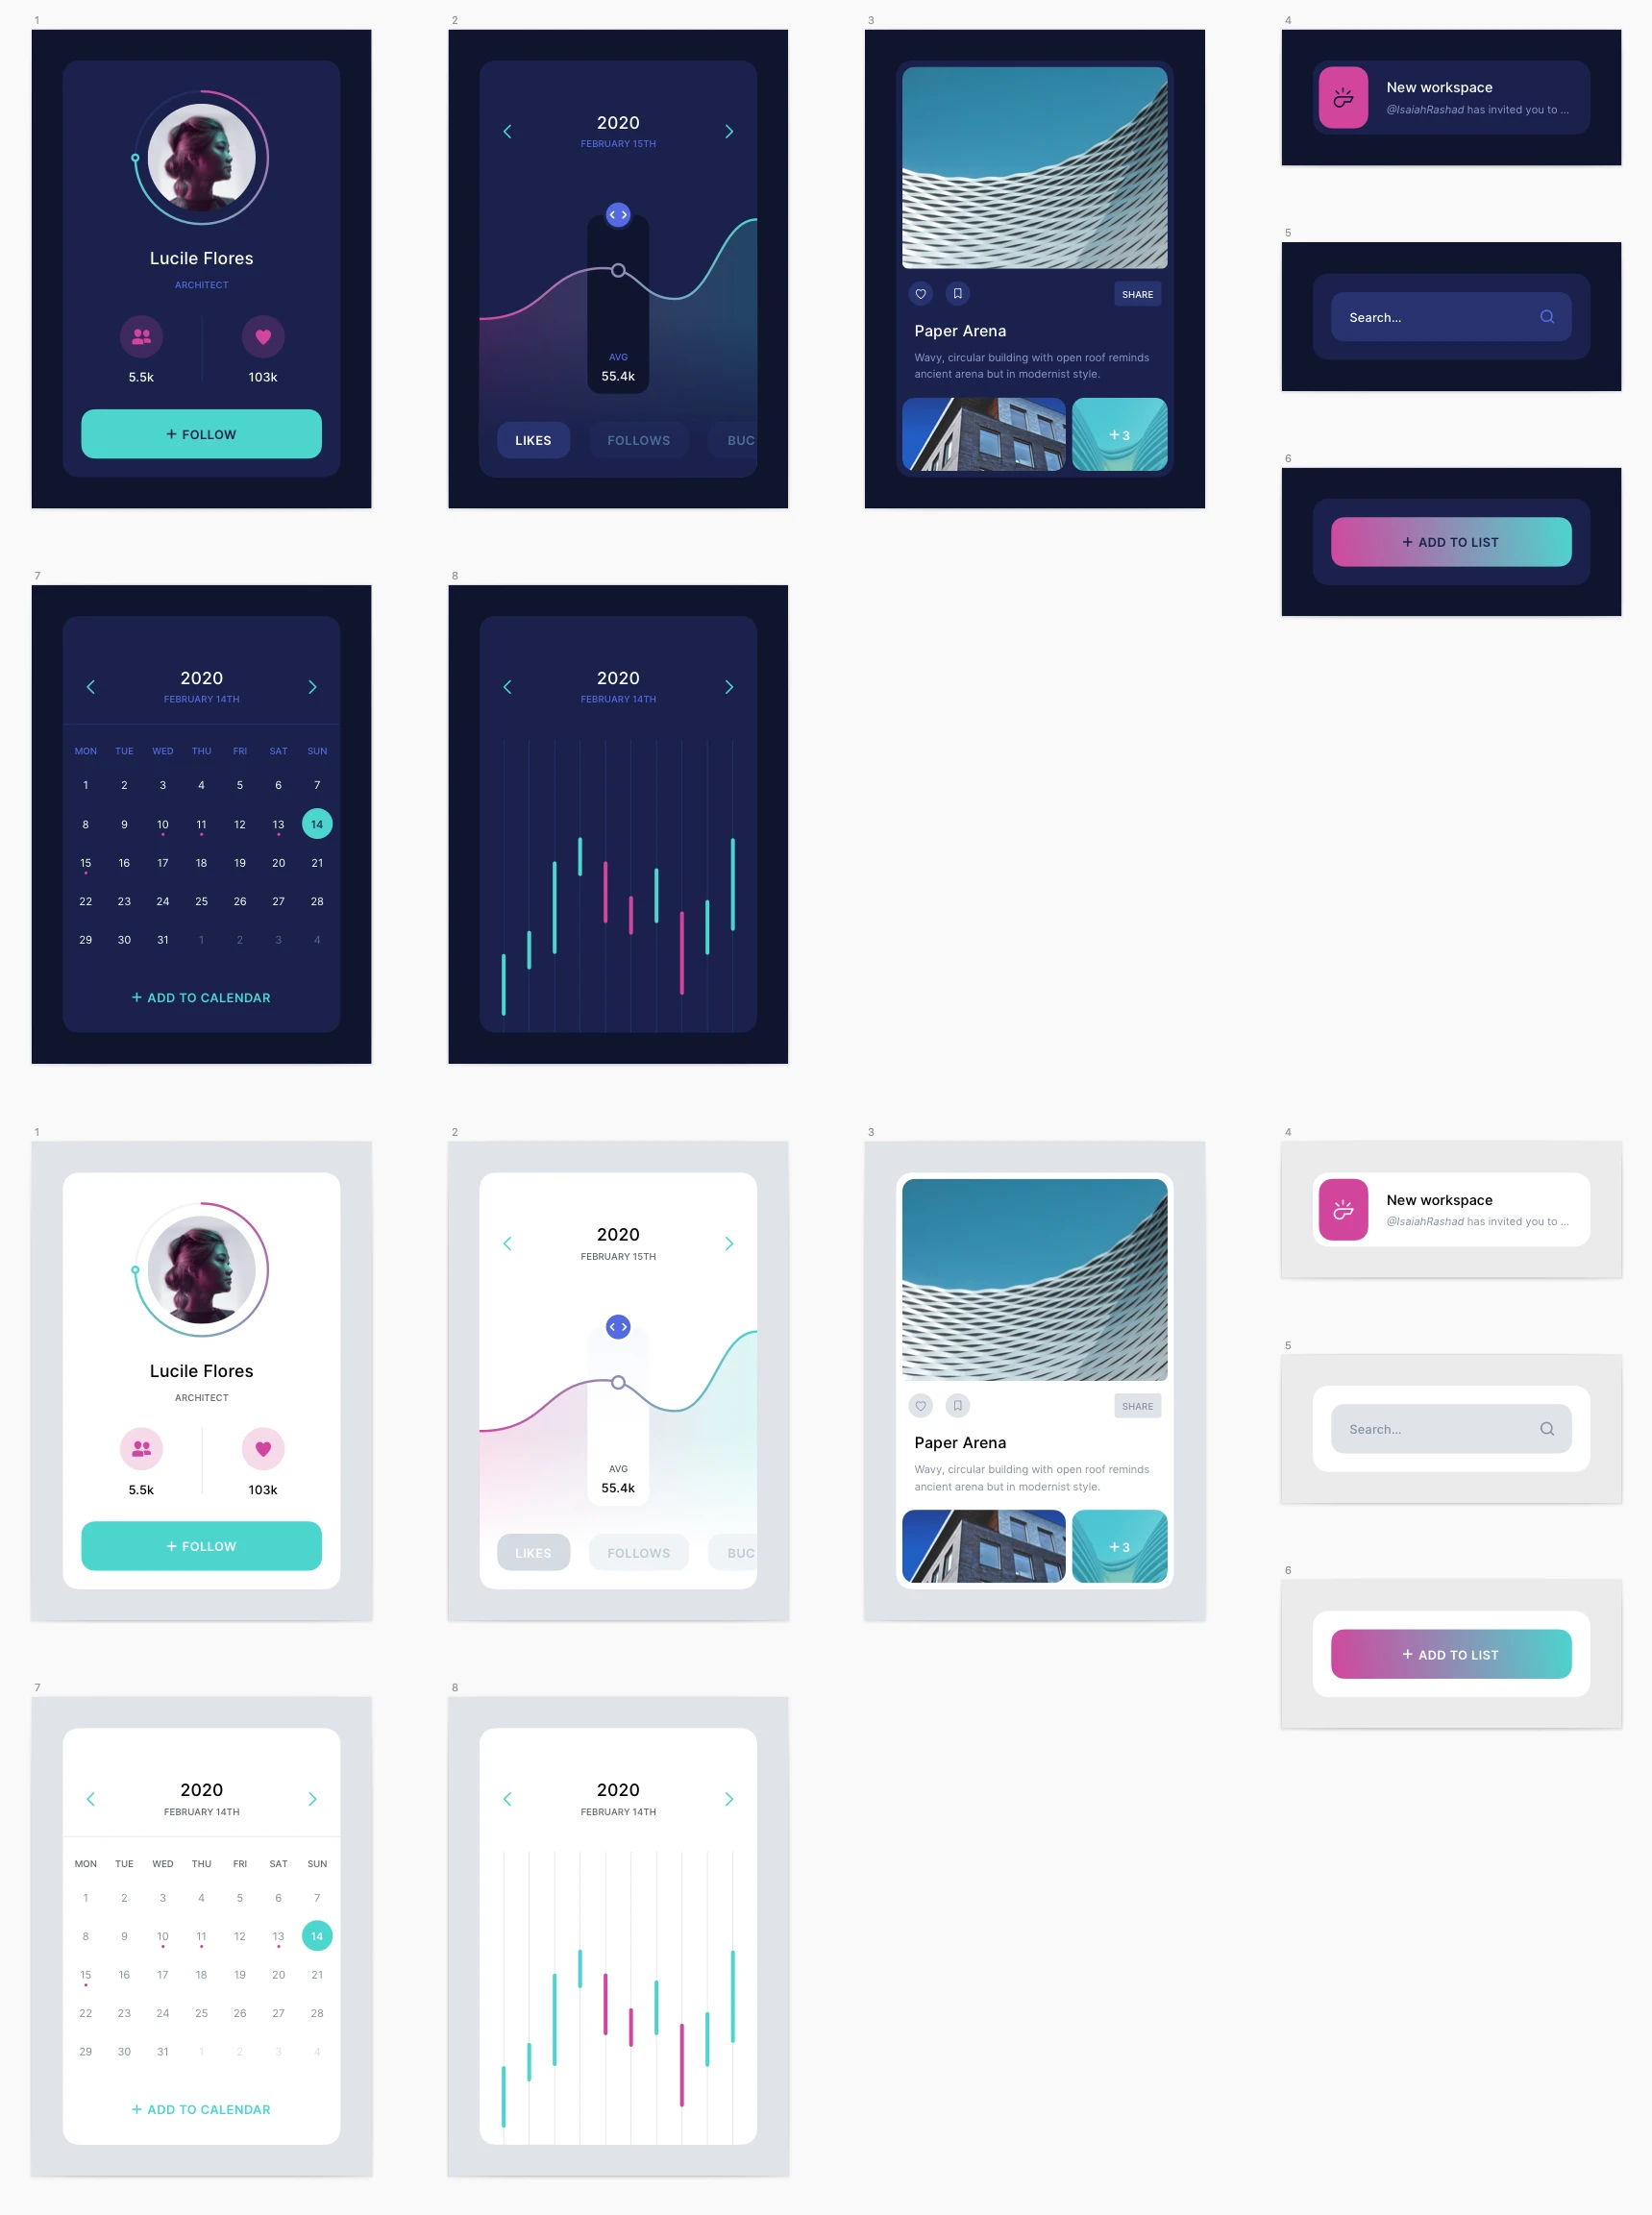 Dark & Light UI Components for Sketch - Just a simple freebie with components you can use across your design, enjoy! File contains both light and dark version of the widgets.